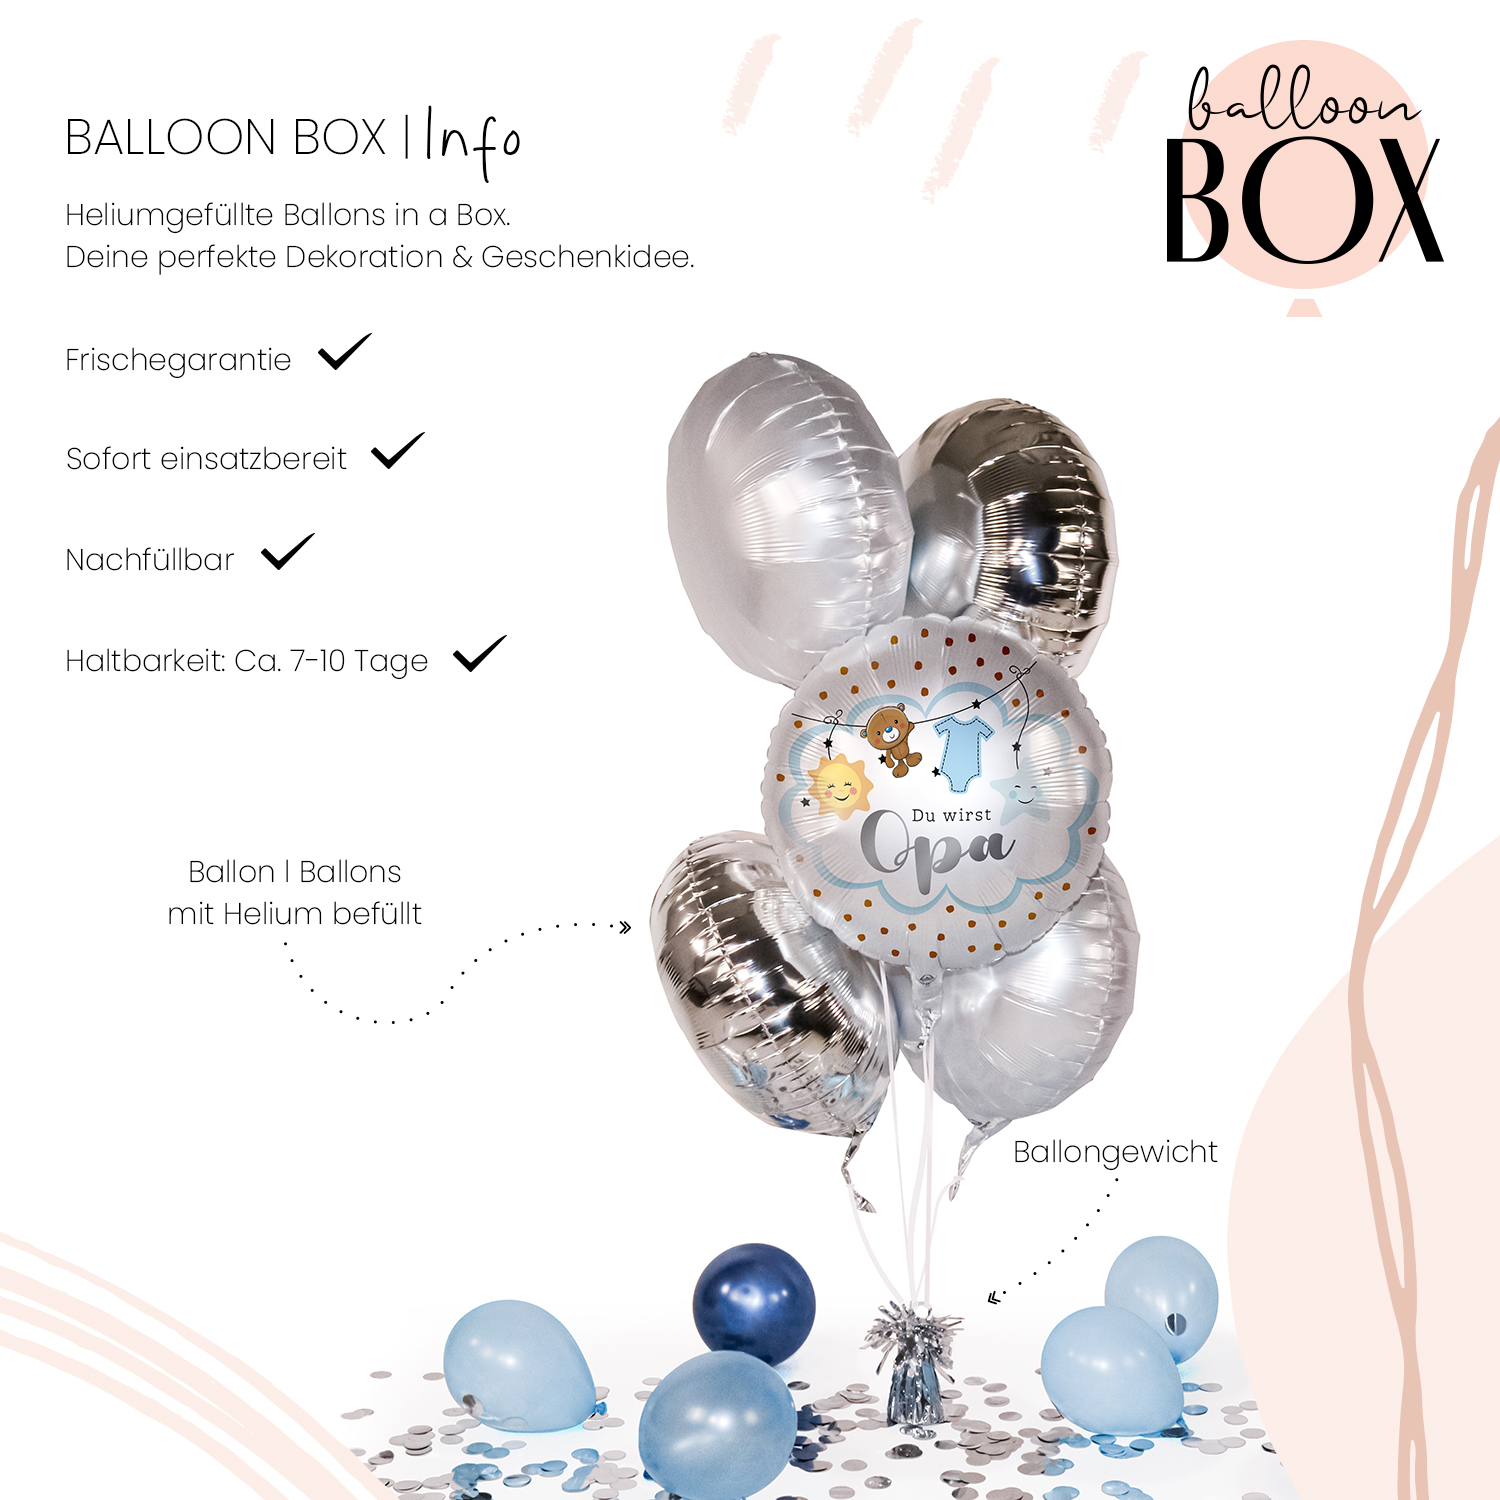 Heliumballon in a Box - Du wirst Opa